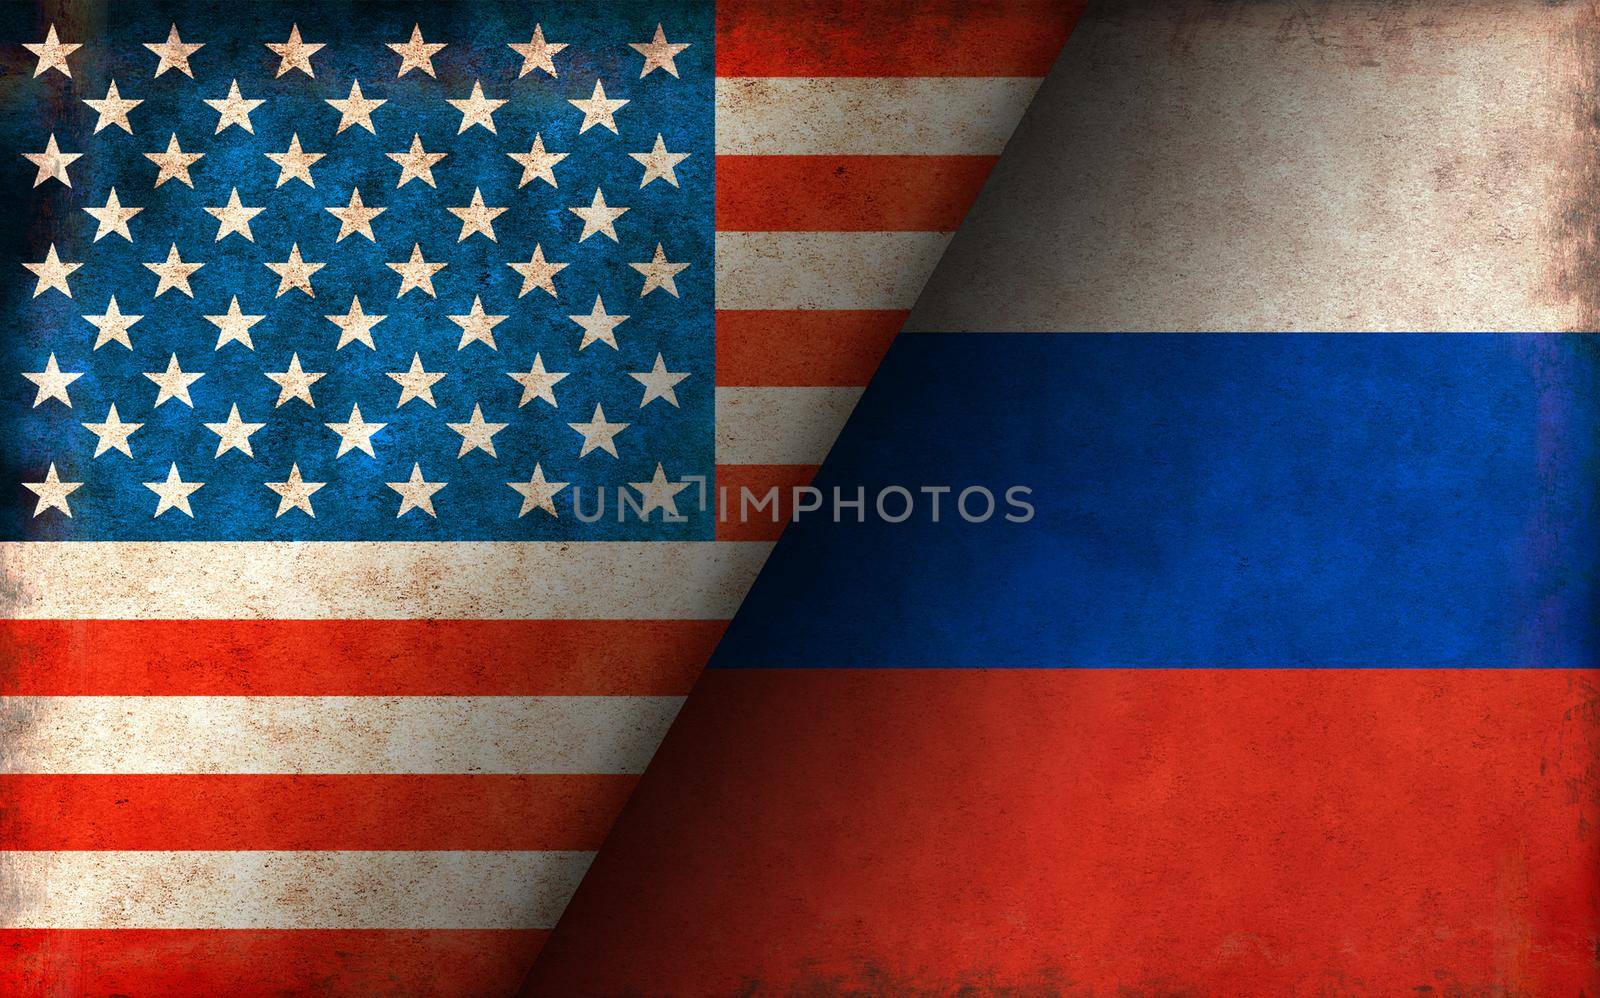 Grunge country flag illustration / USA vs Russia (Political or economic conflict)